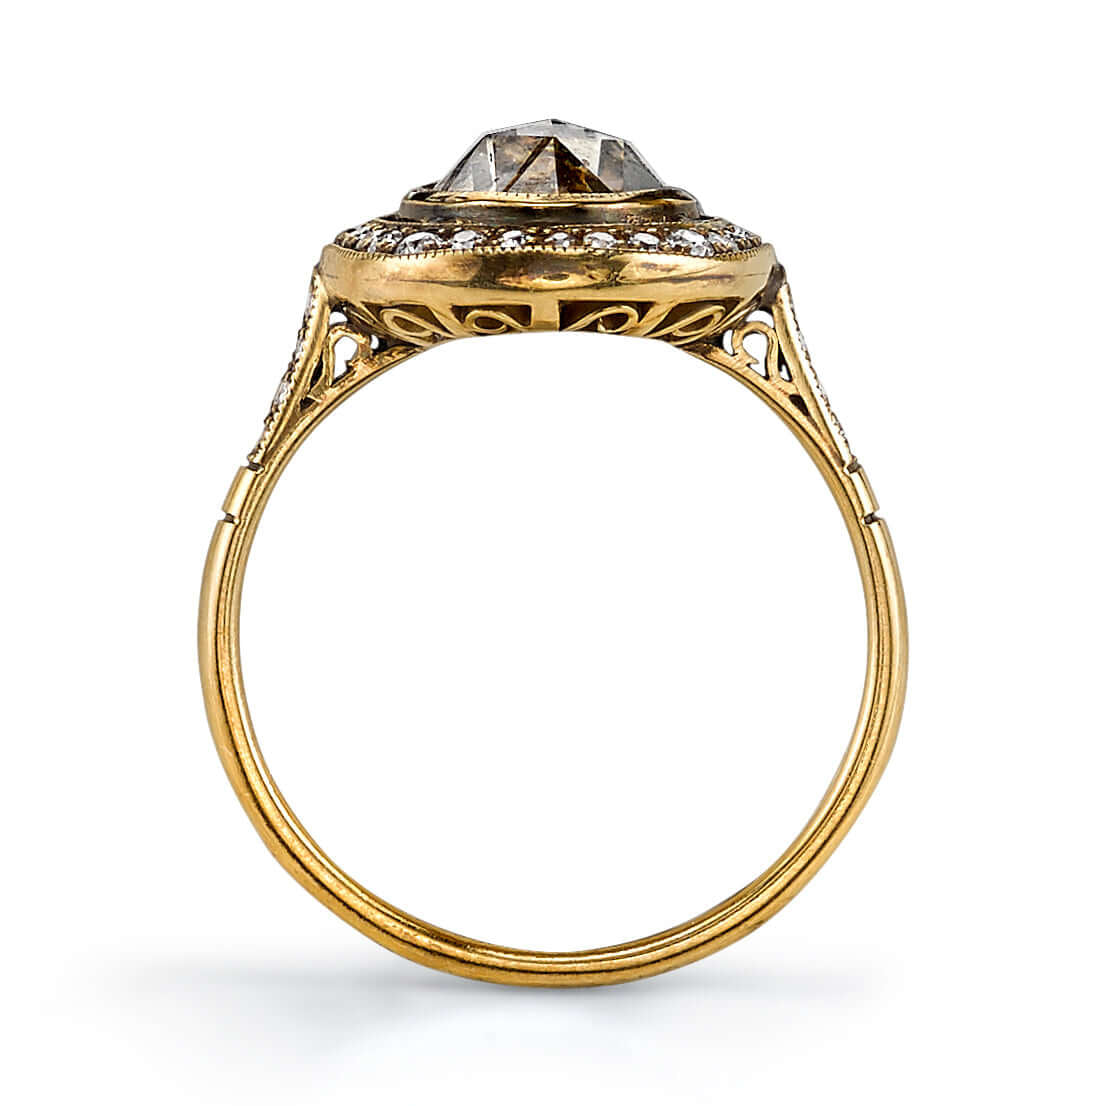 SINGLE STONE CAMILLE RING featuring 2.12ct Brown/SI oval shaped Rose cut diamond with 0.18ctw old European cut accent diamonds set in a handcrafted oxidized 18K yellow gold mounting.